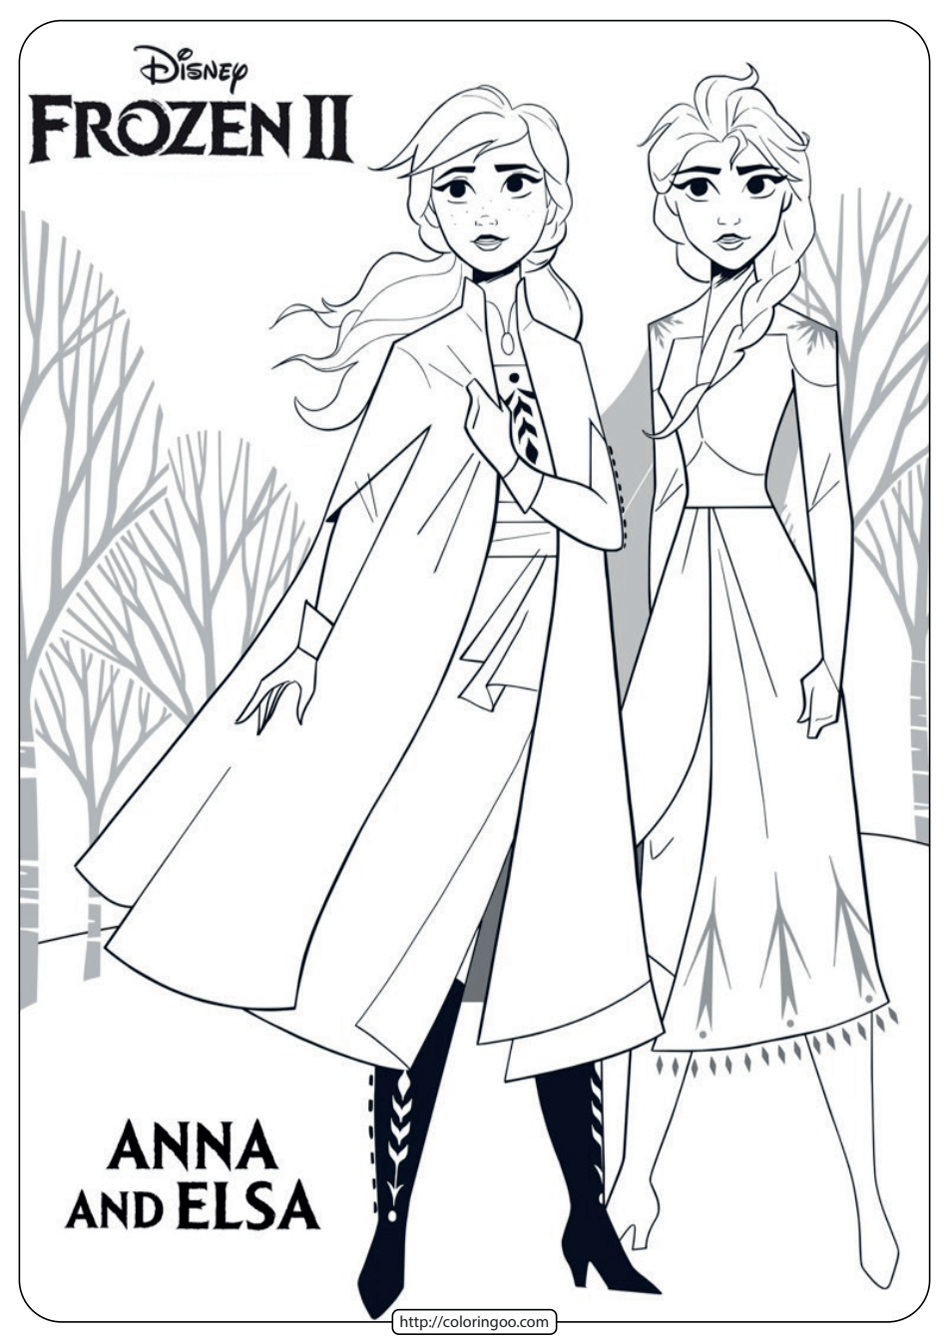 disney frozen anna and elsa coloring pages